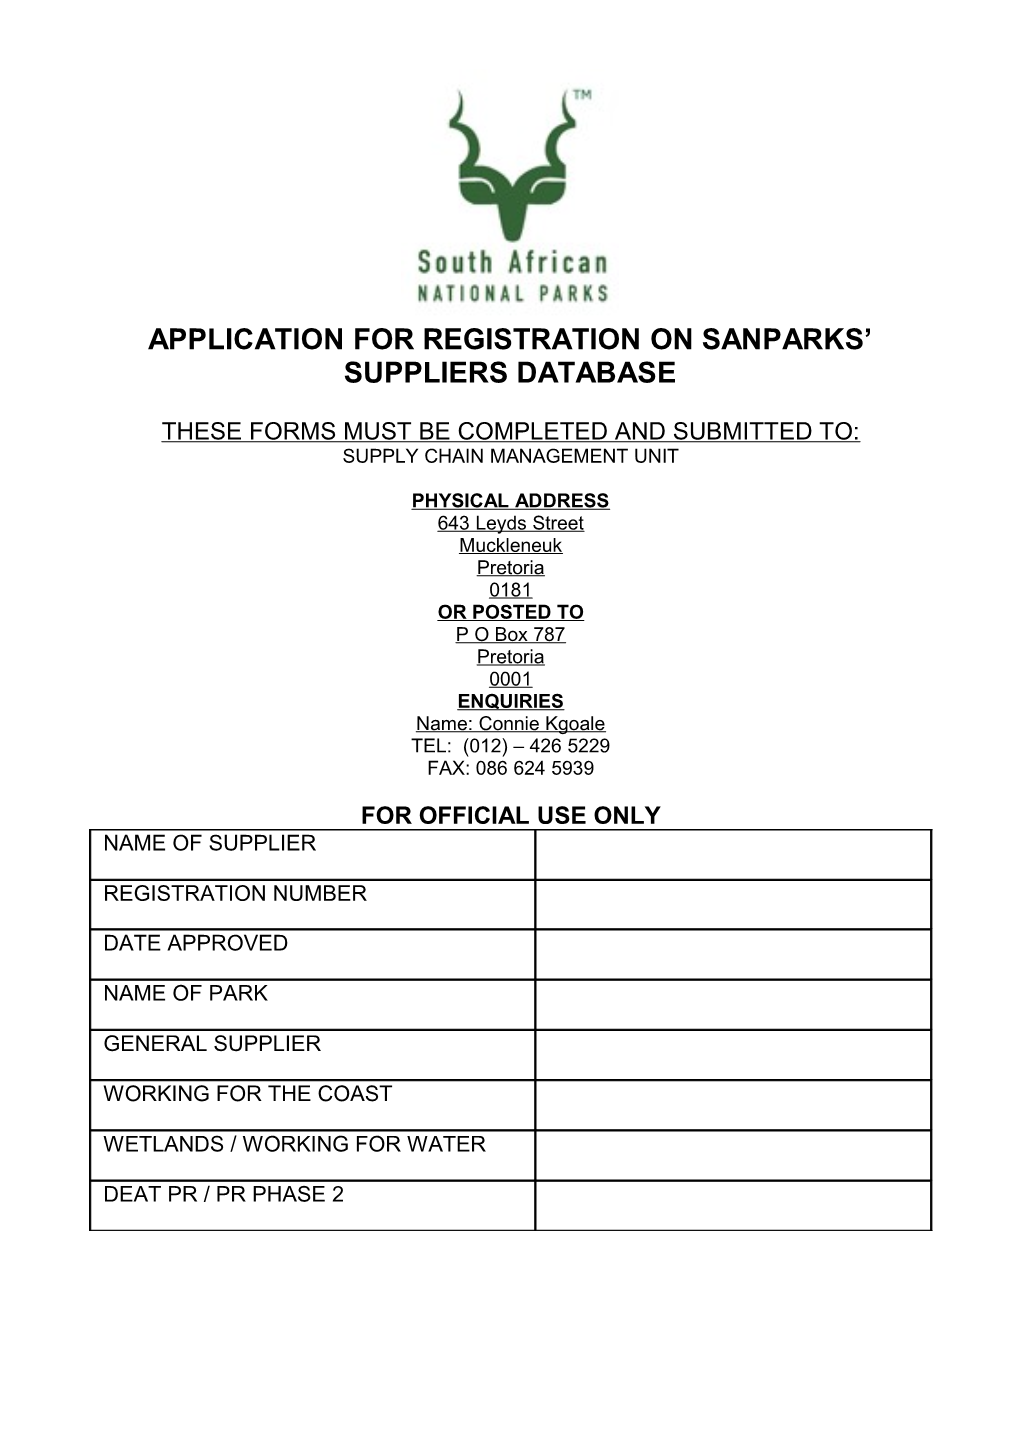 Application for Registration on Sanparks Suppliers Database